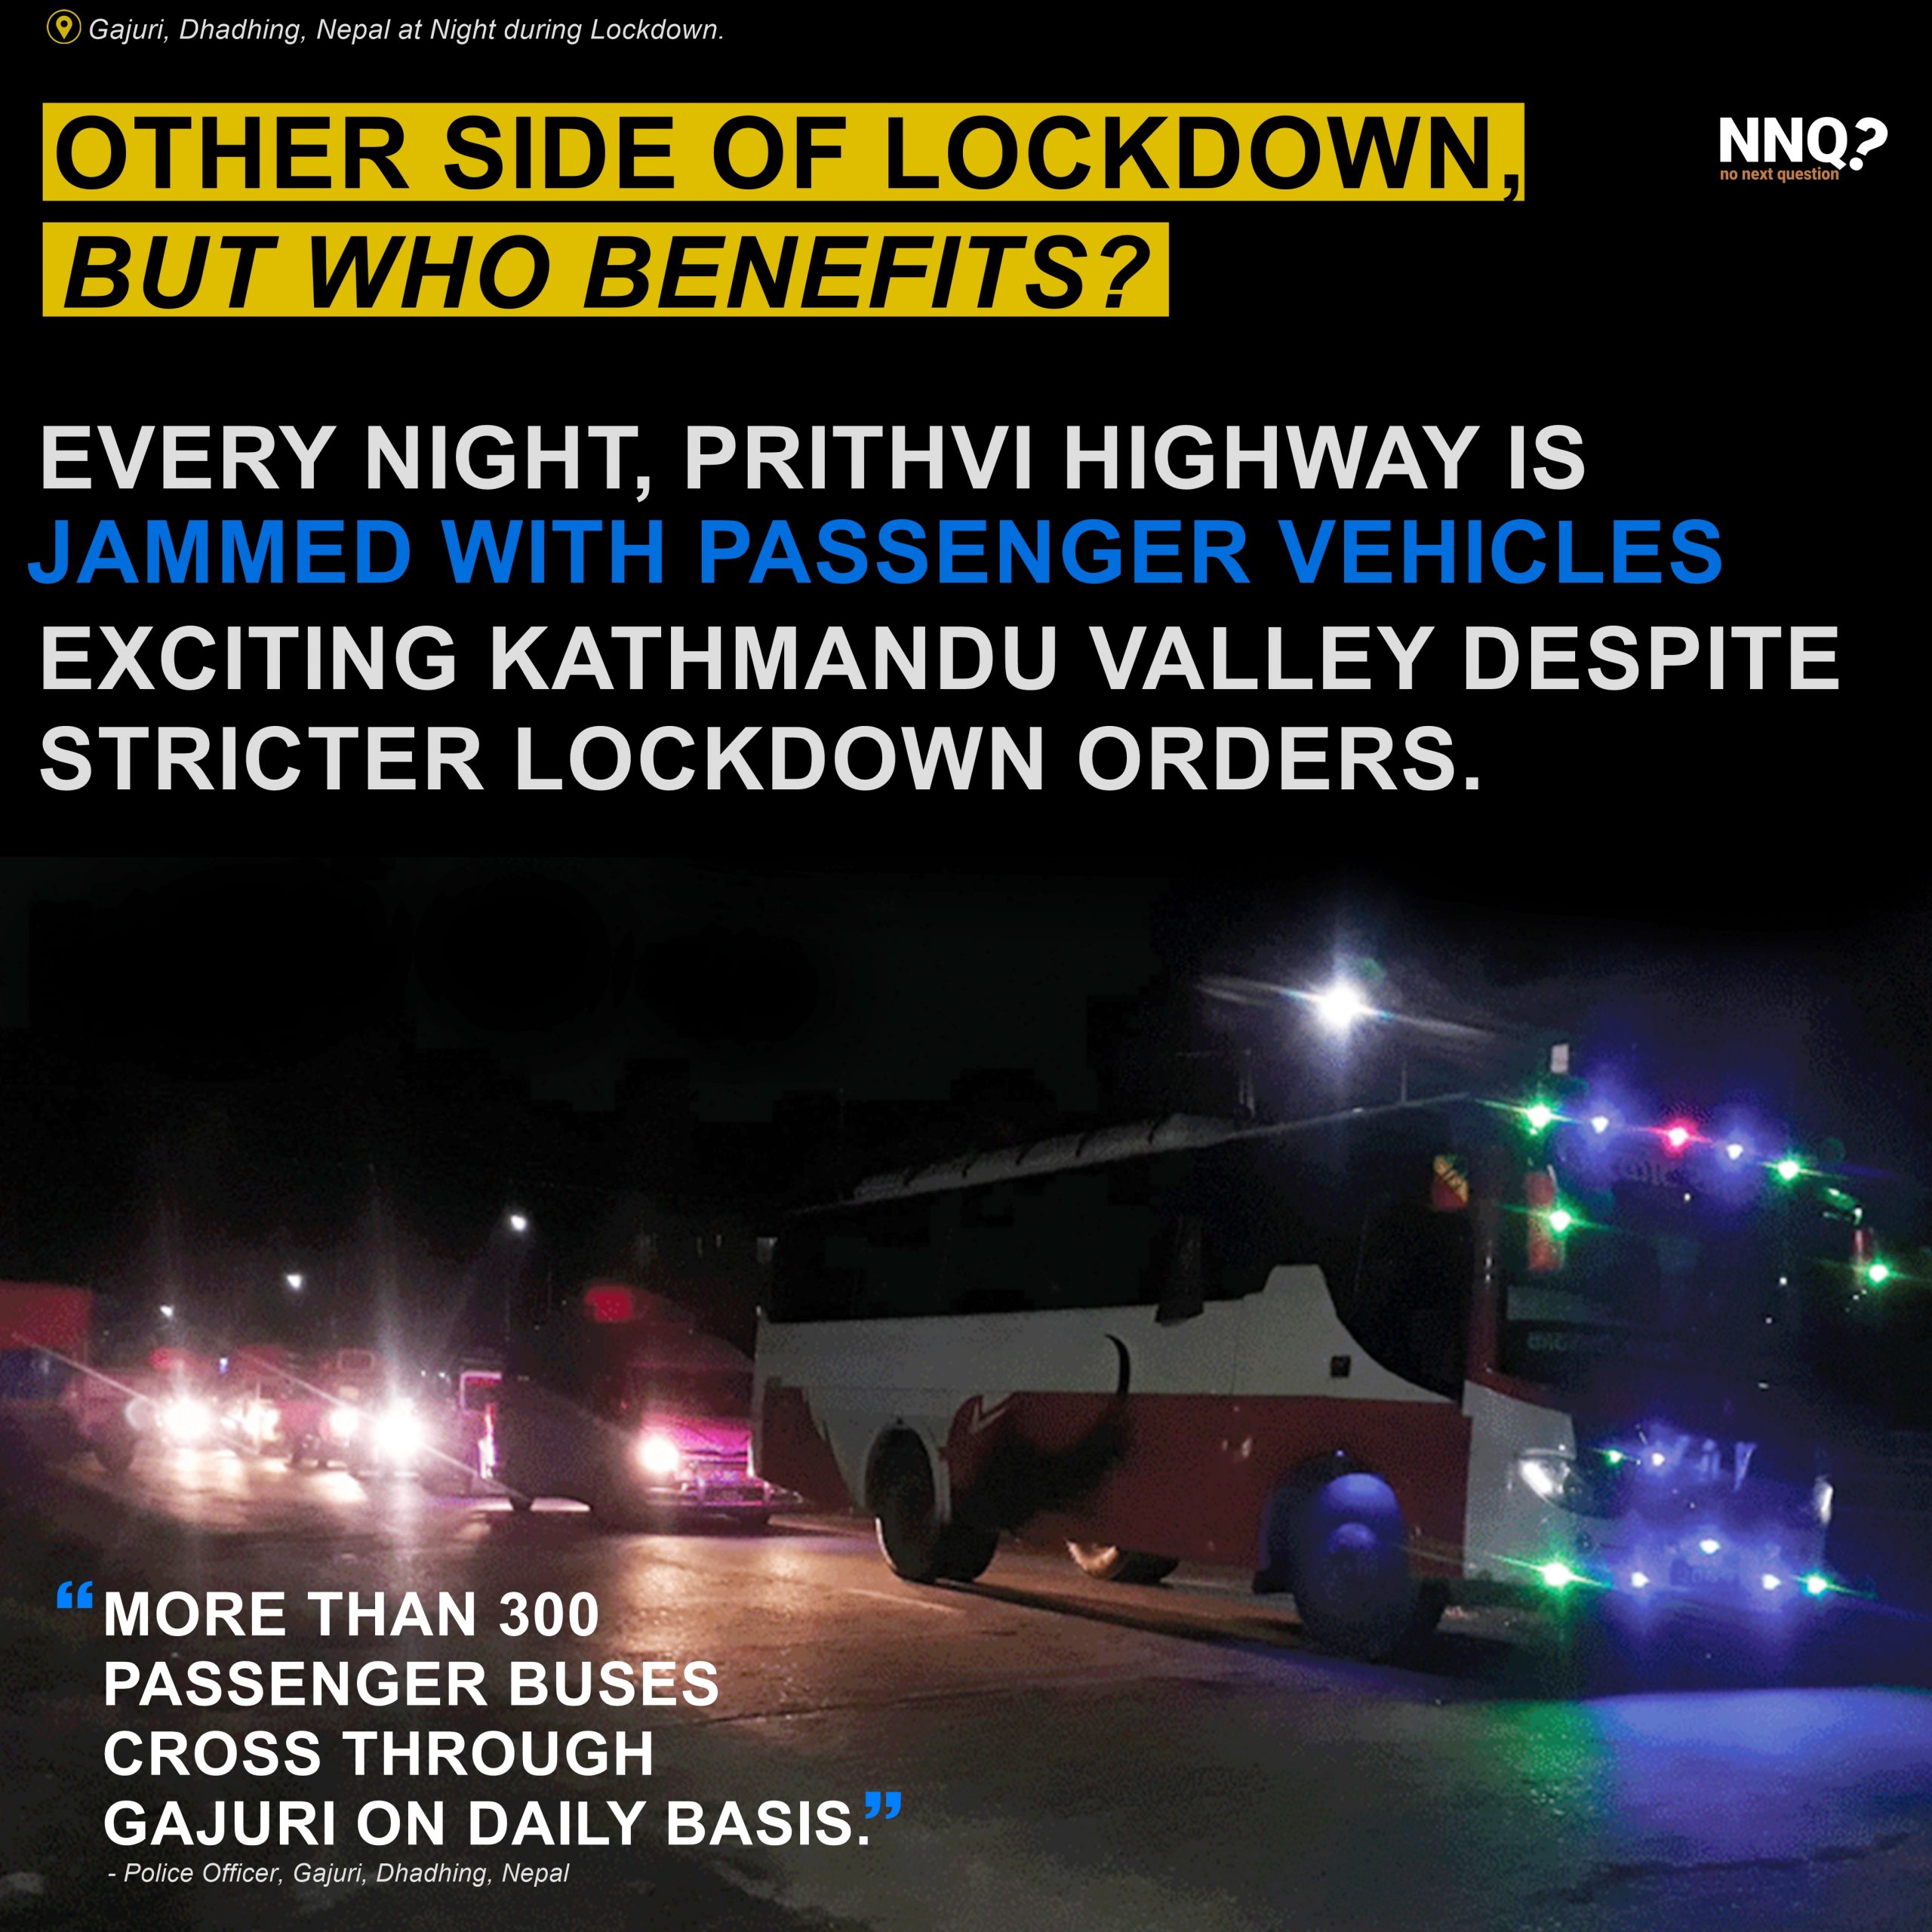 Other side of Lockdown in Nepal